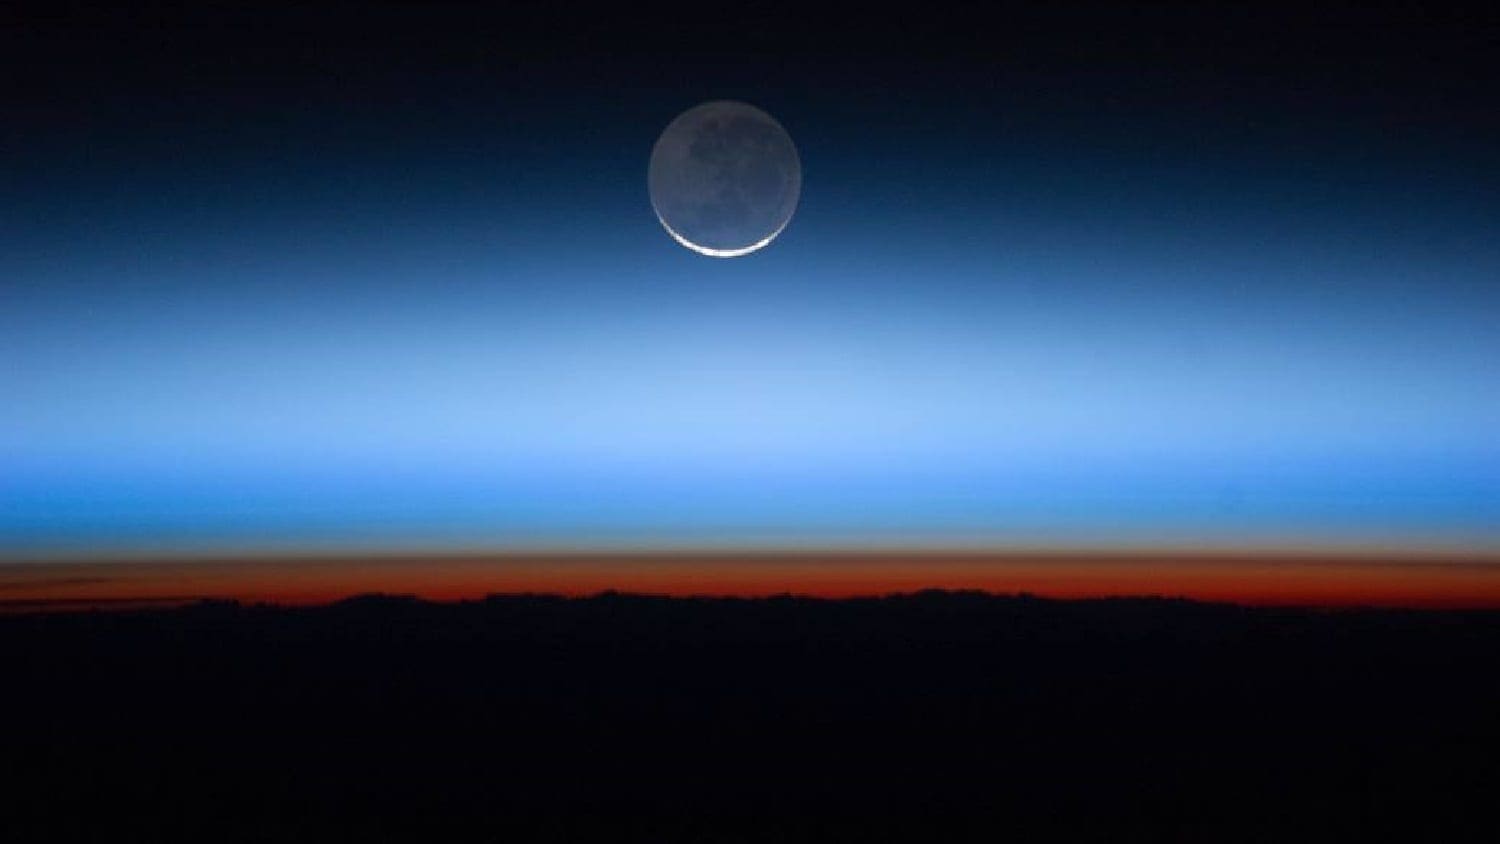 Earth's atmospheric layers at sunset from the ISS, photo credit: NASA